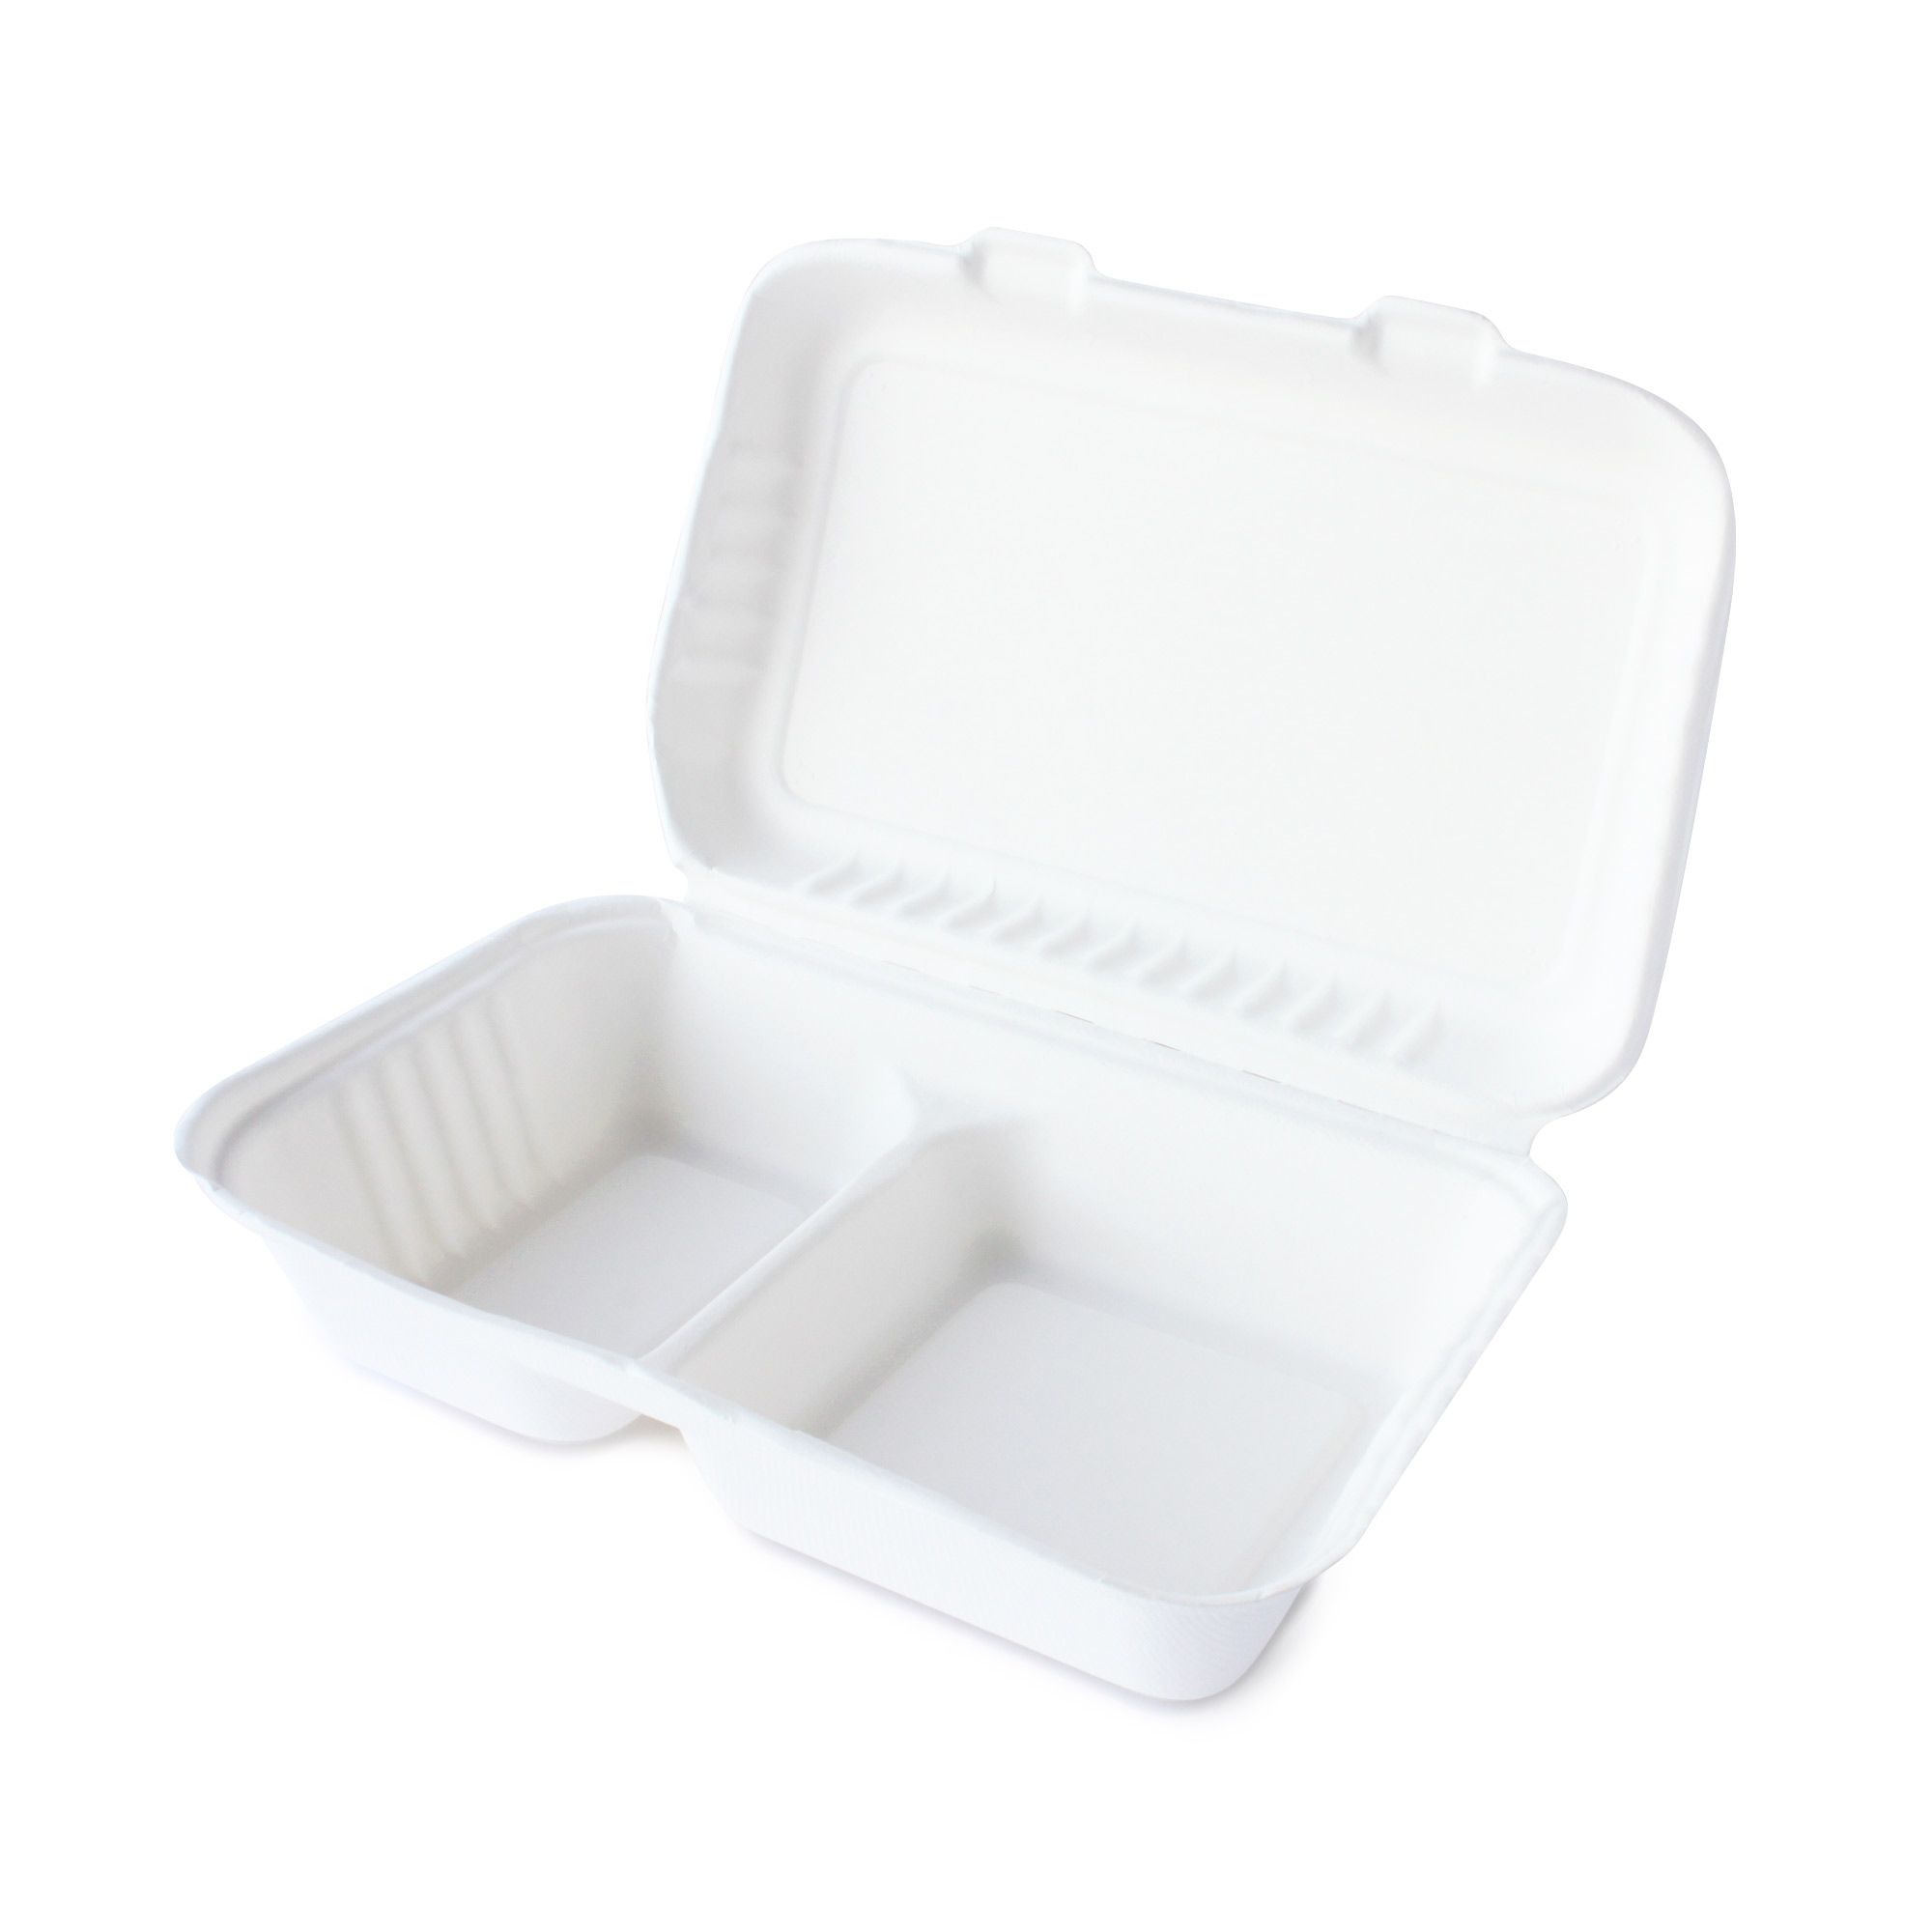 https://cdn.ready-market.com.tw/bac6eec5/Templates/pic/tc-rectangle-clamshell-double-compartment-bagasse-meal-box-1.jpg?v=4236a5a7